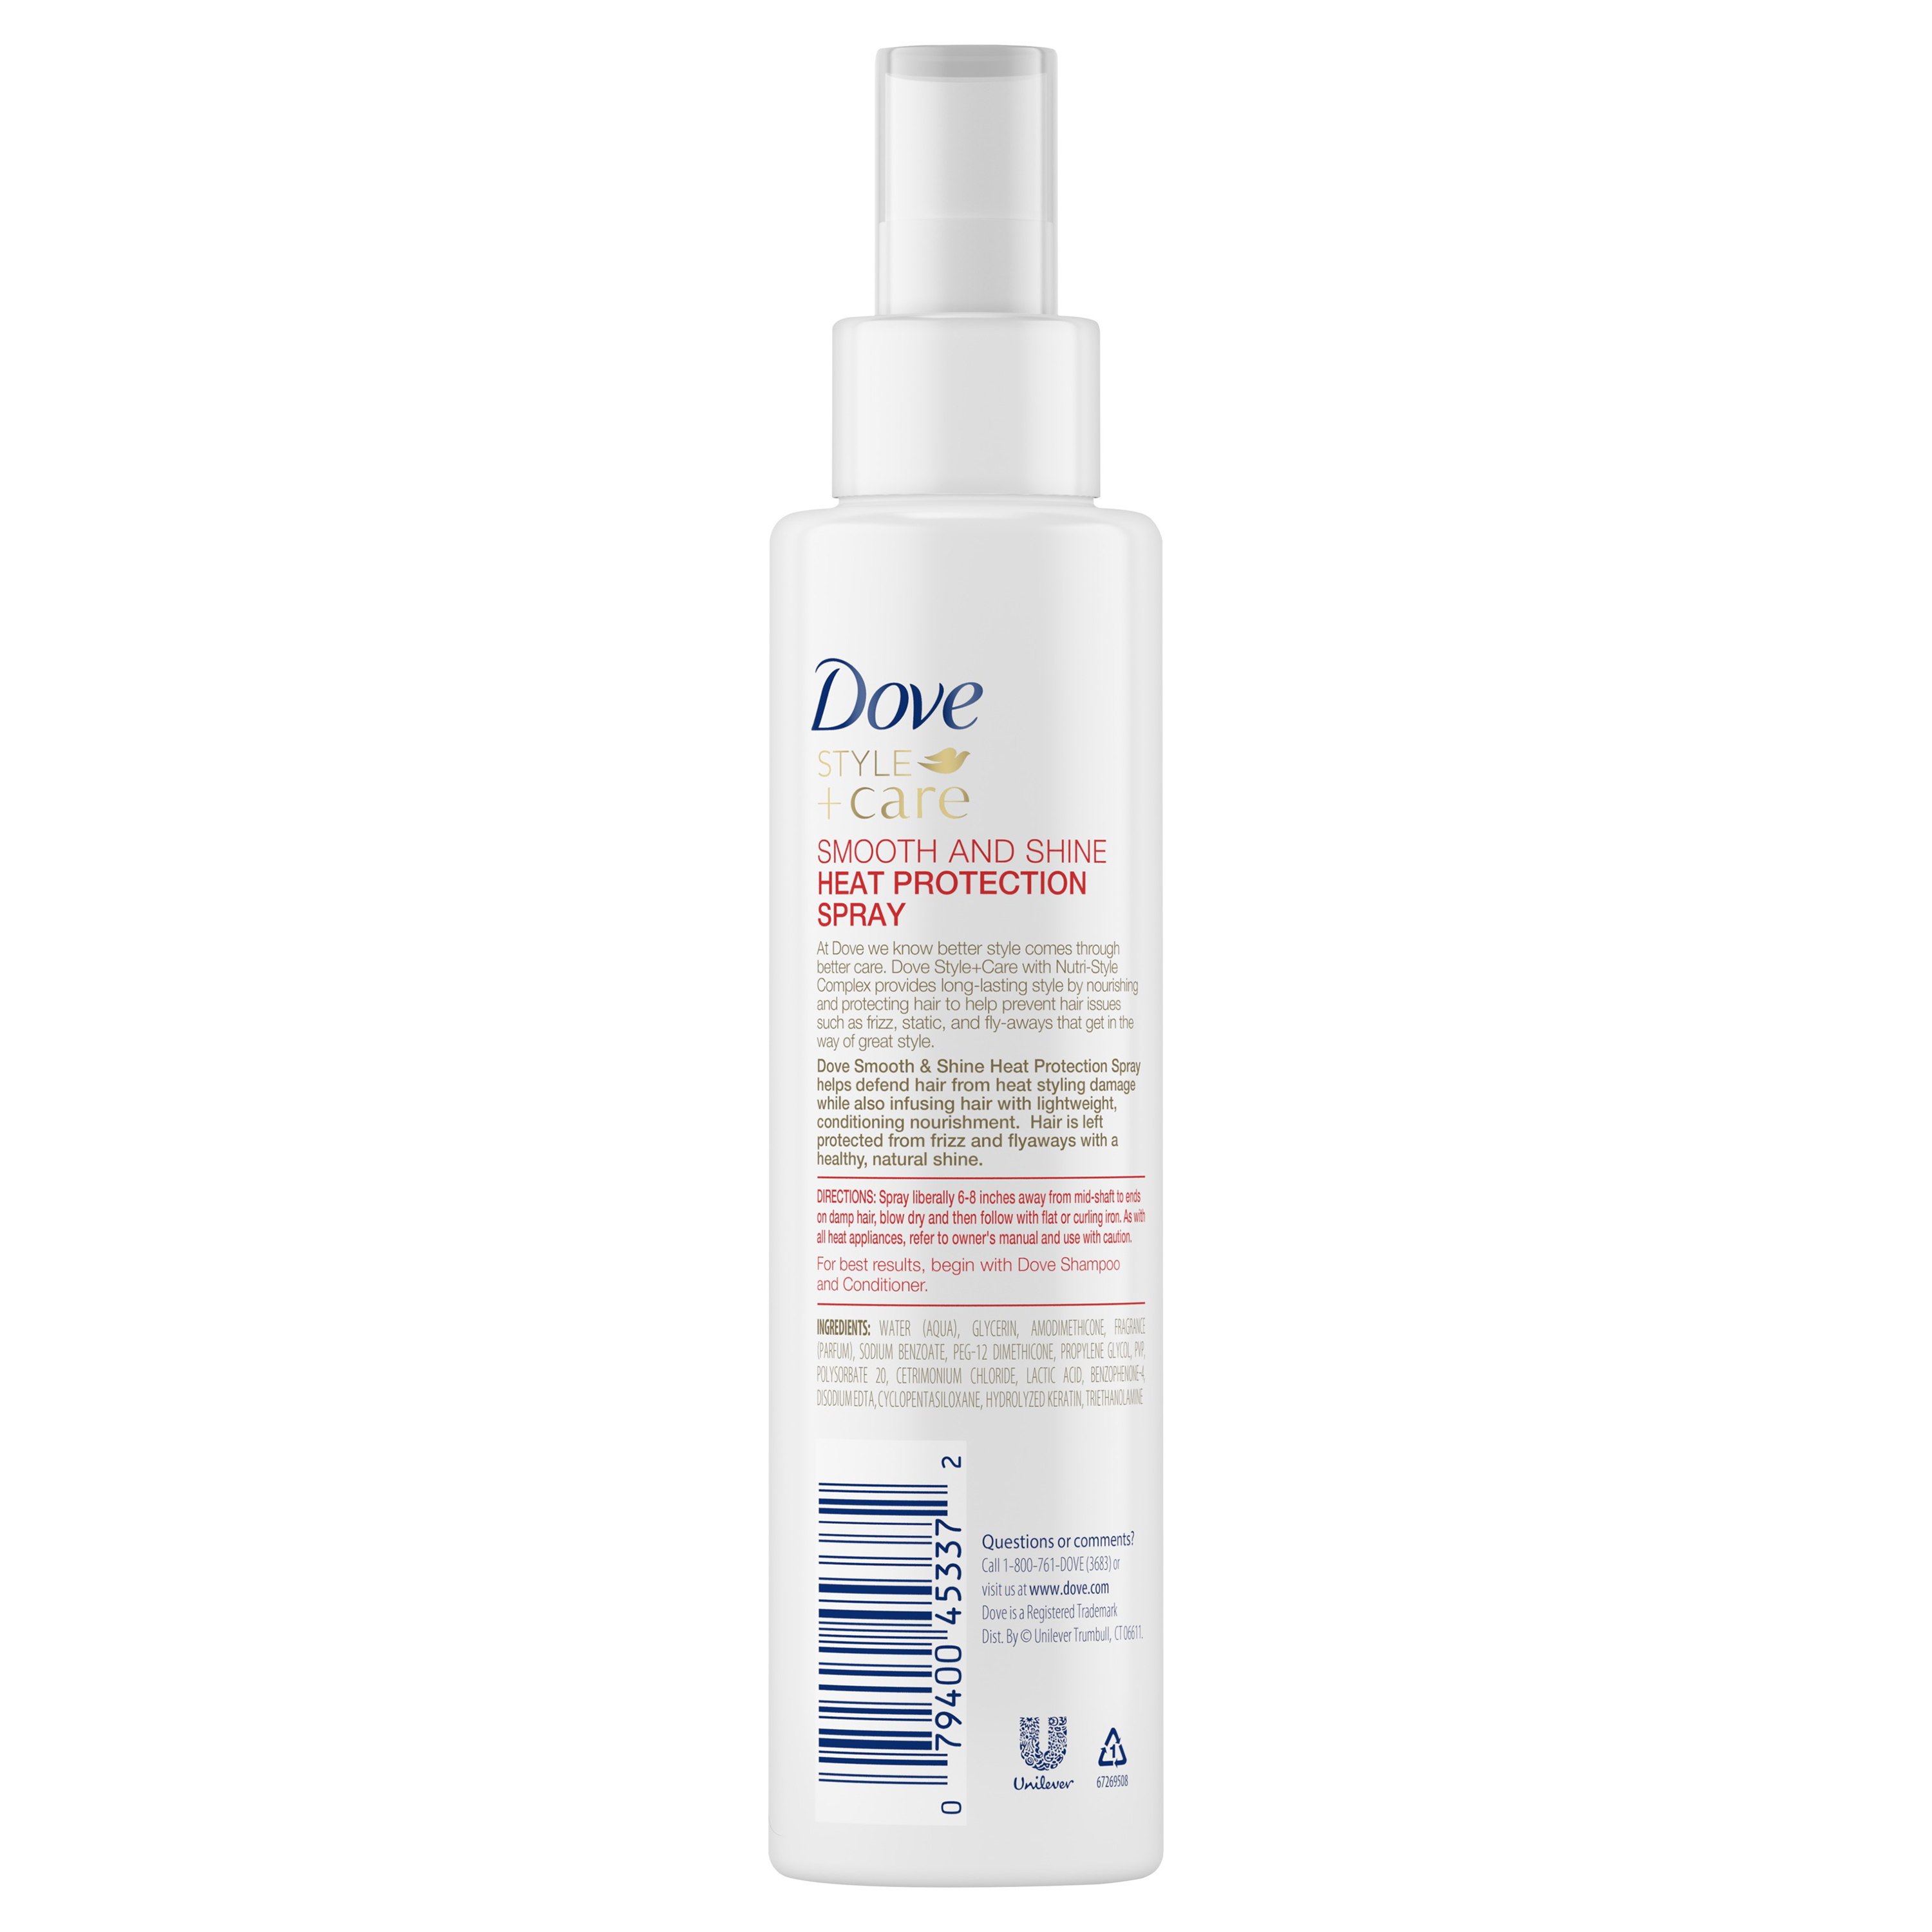 Dove Style+Care Smooth & Shine Heat-Protect Spray , 6.1 oz - image 2 of 6